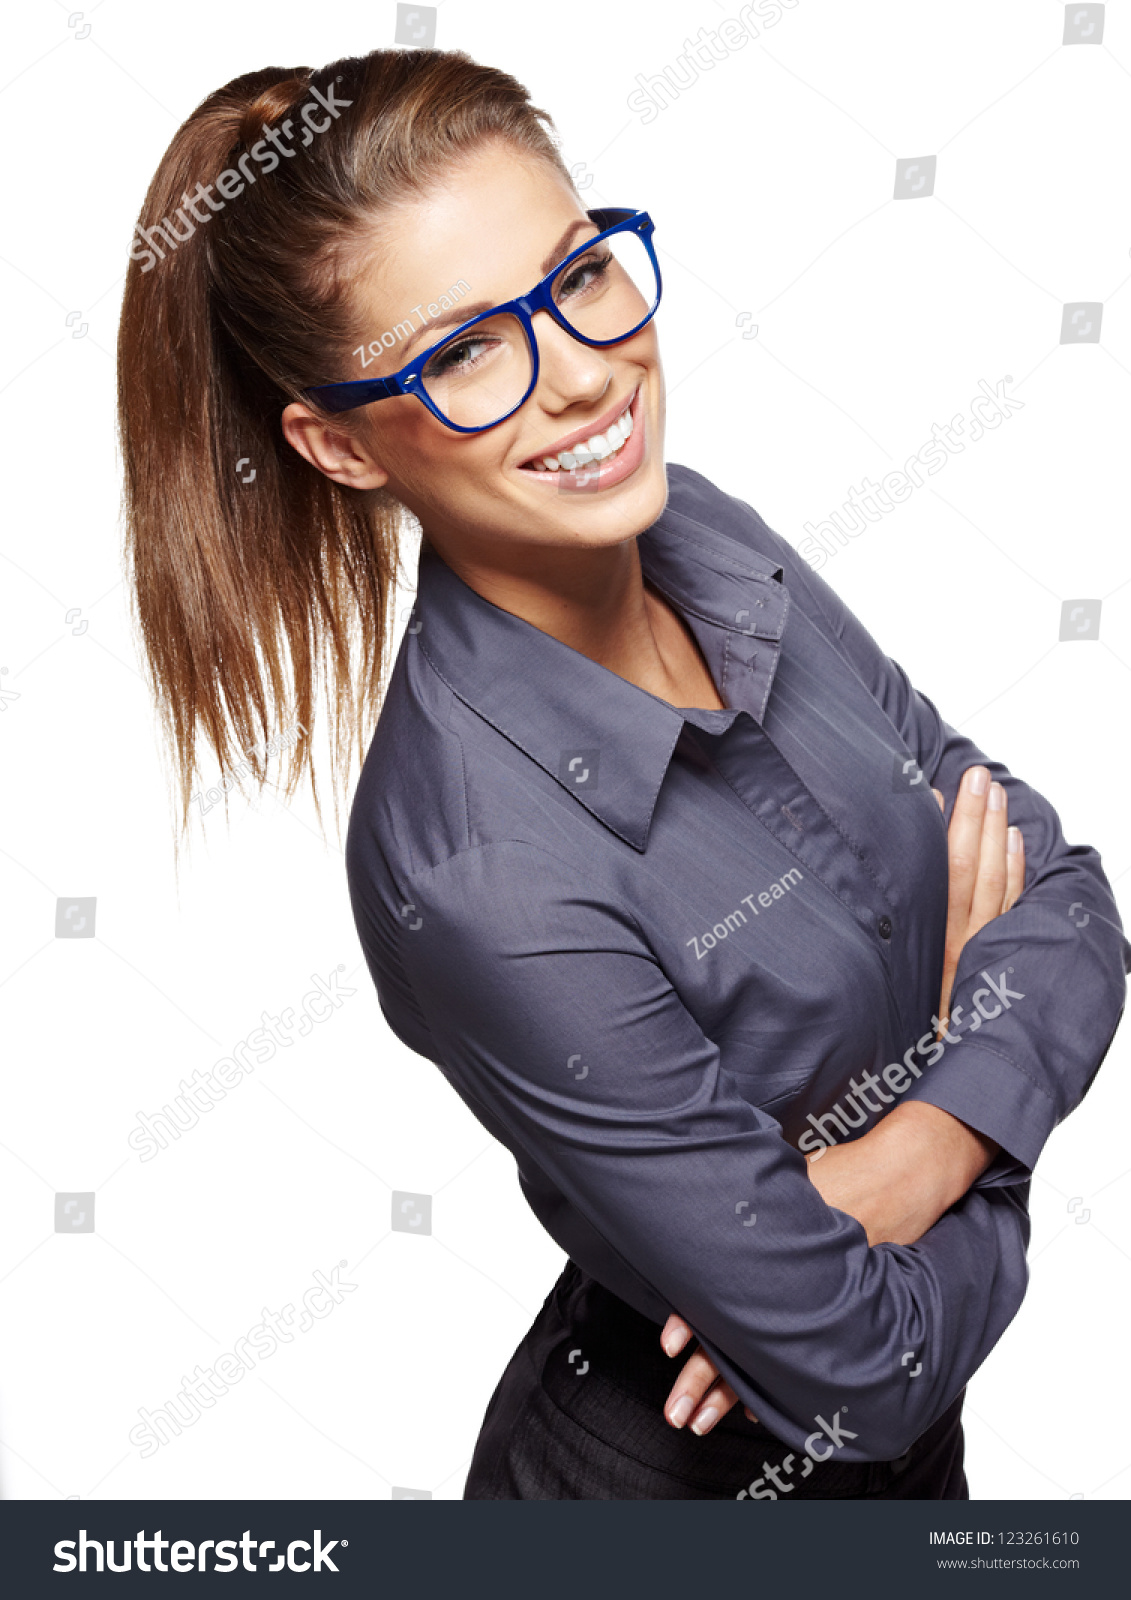 Cute young business woman with glasses #123261610